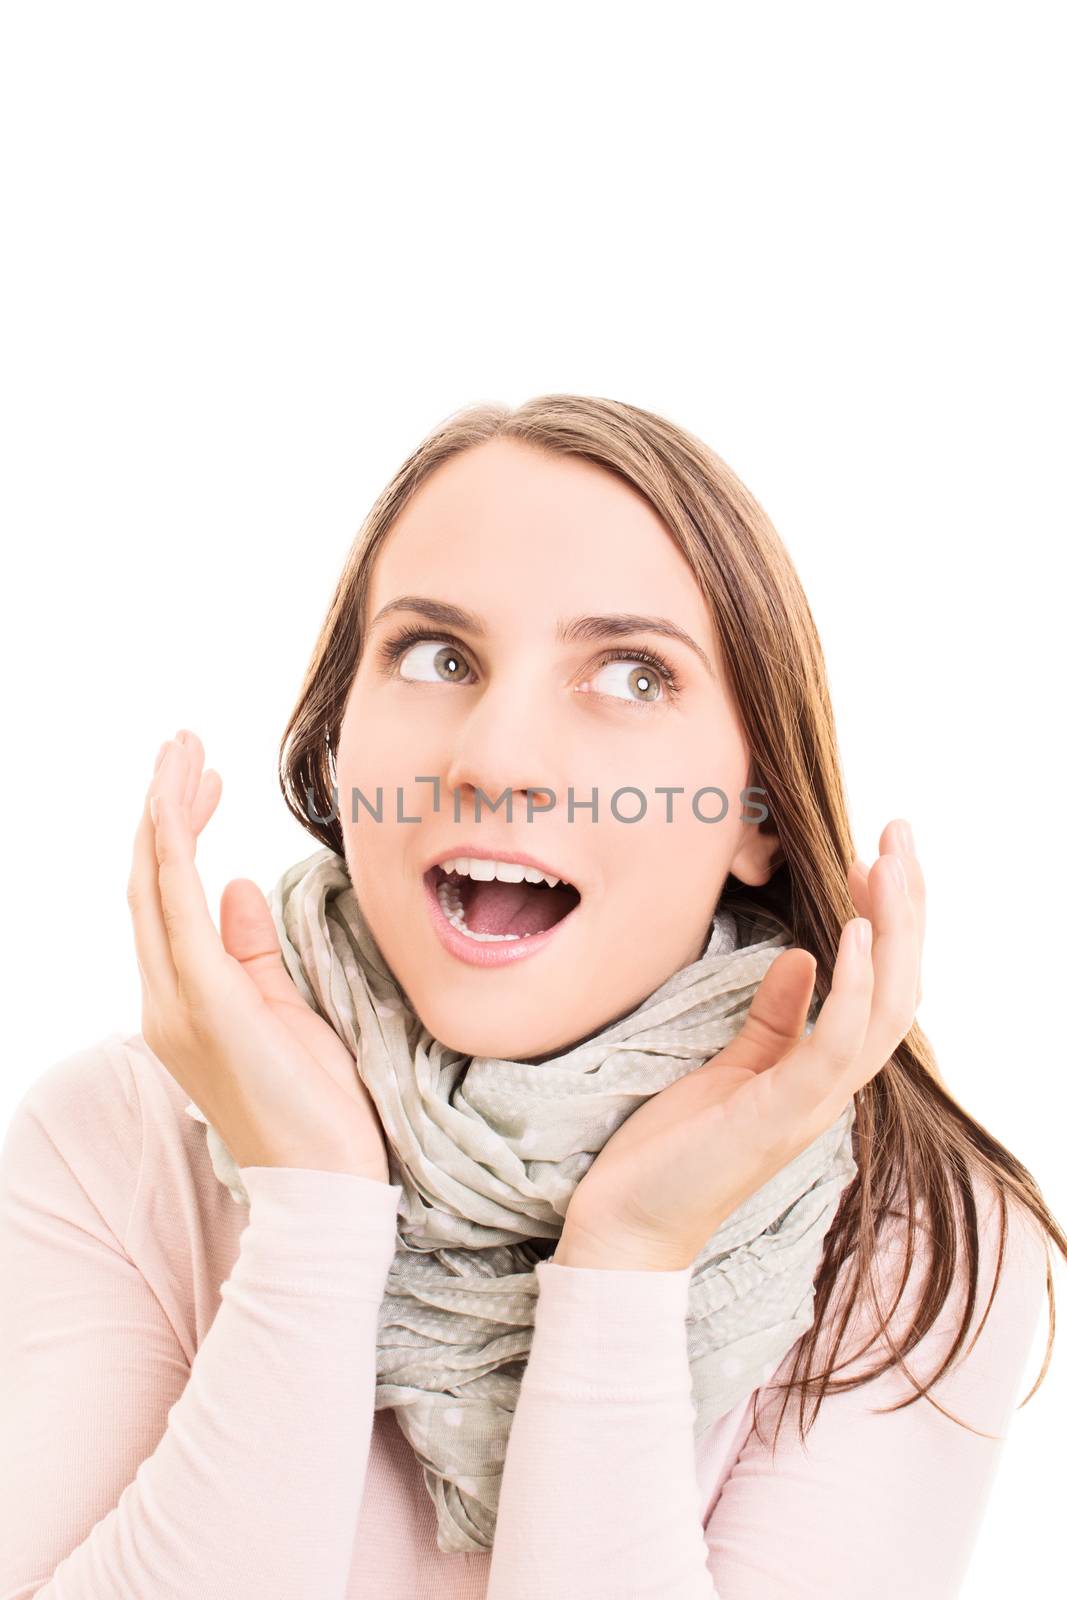 Young girl acting surprised, isolated on white background.